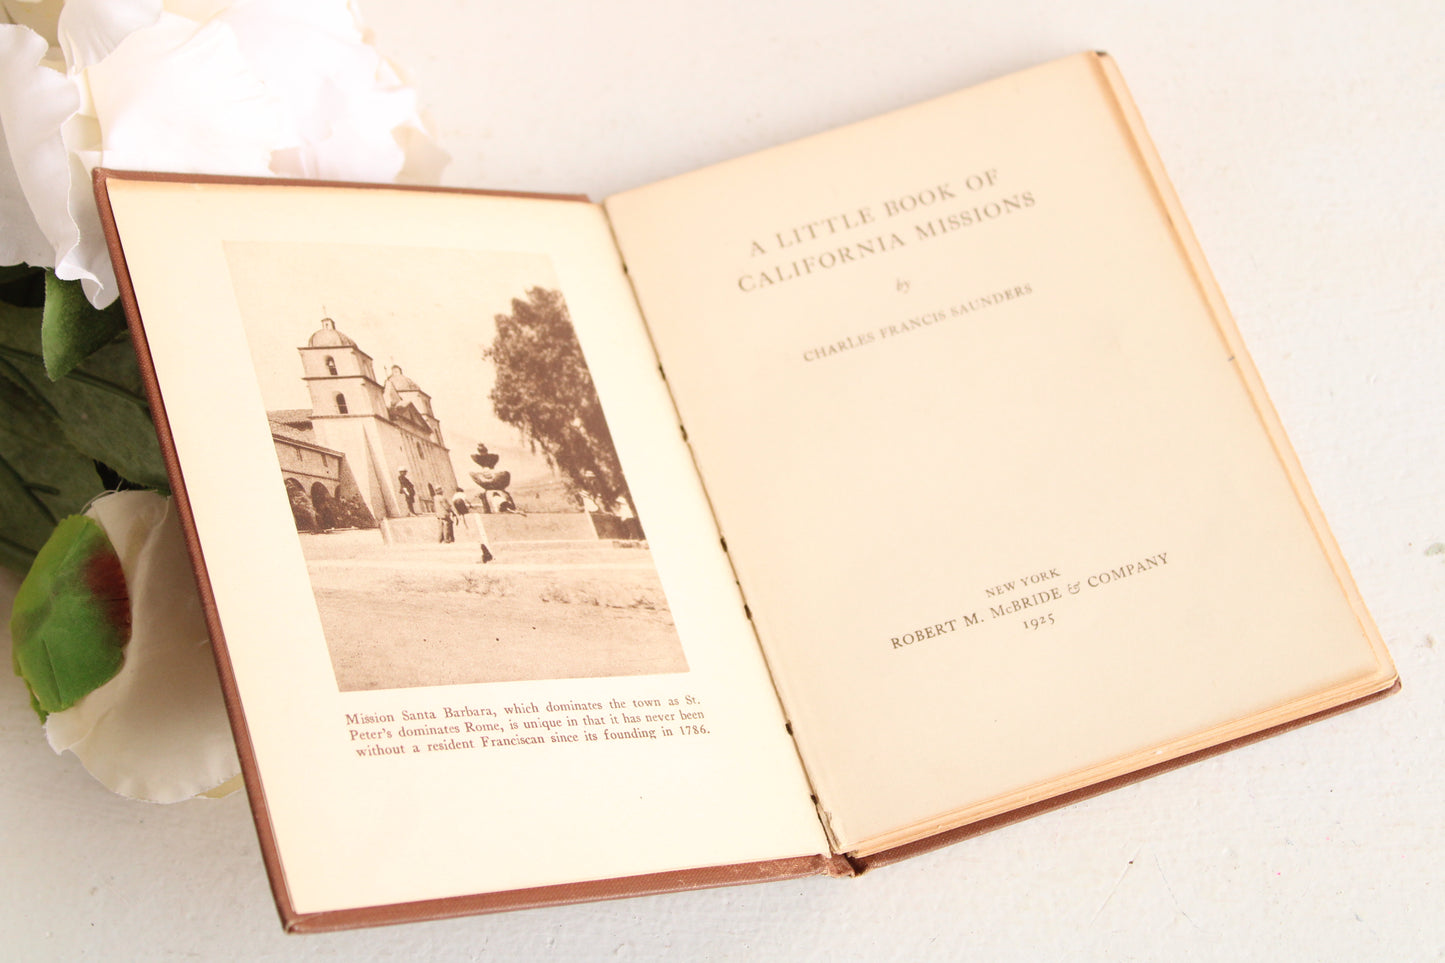 Vintage 1920s Book, "A Little Book of California Missions", by Charles Francis Saunders